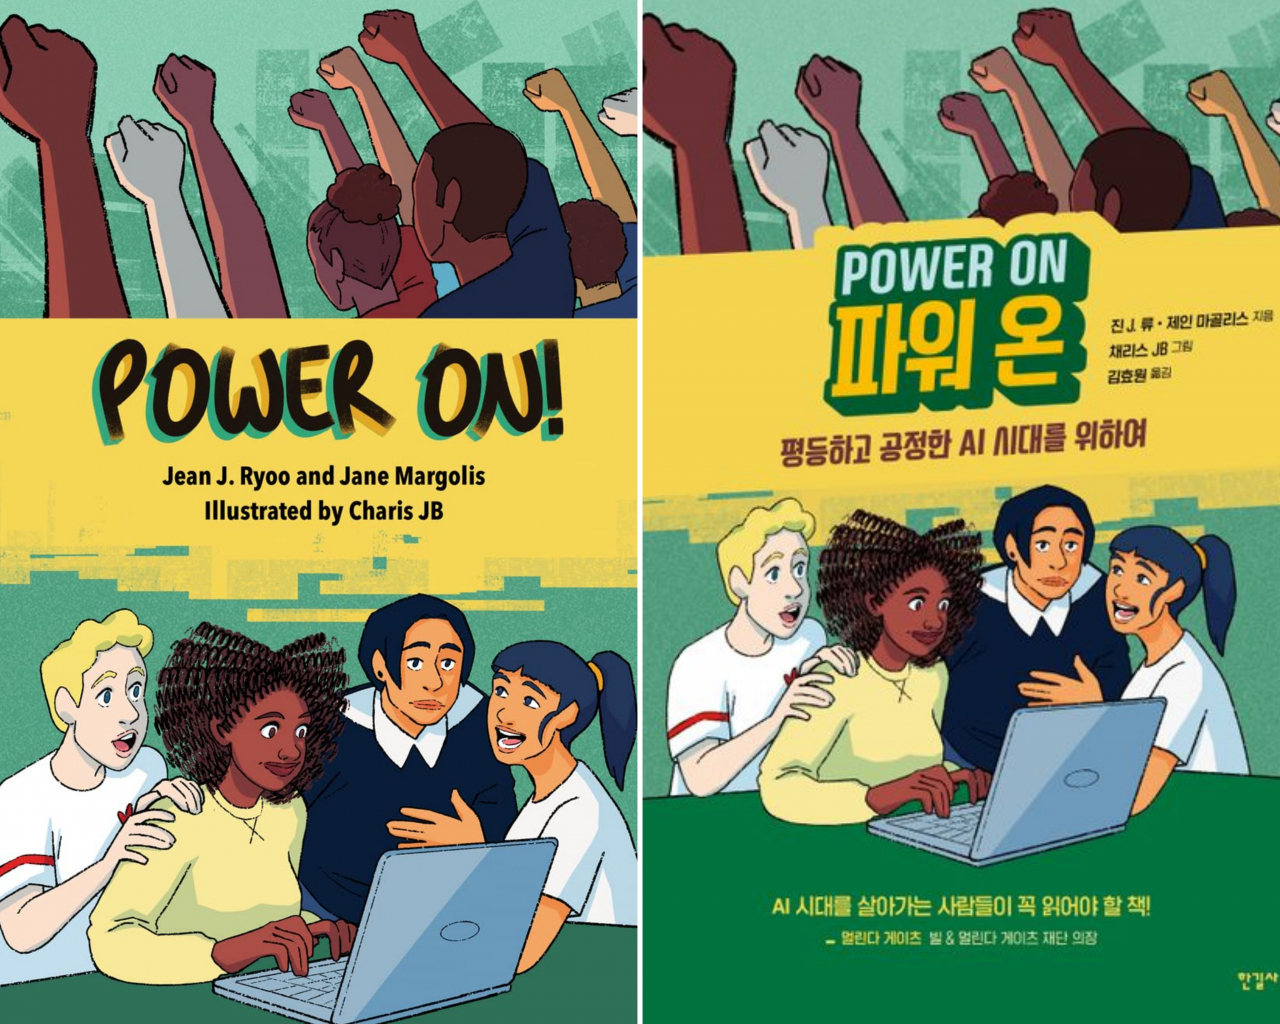 The English edition (left) and the Korean edition of 